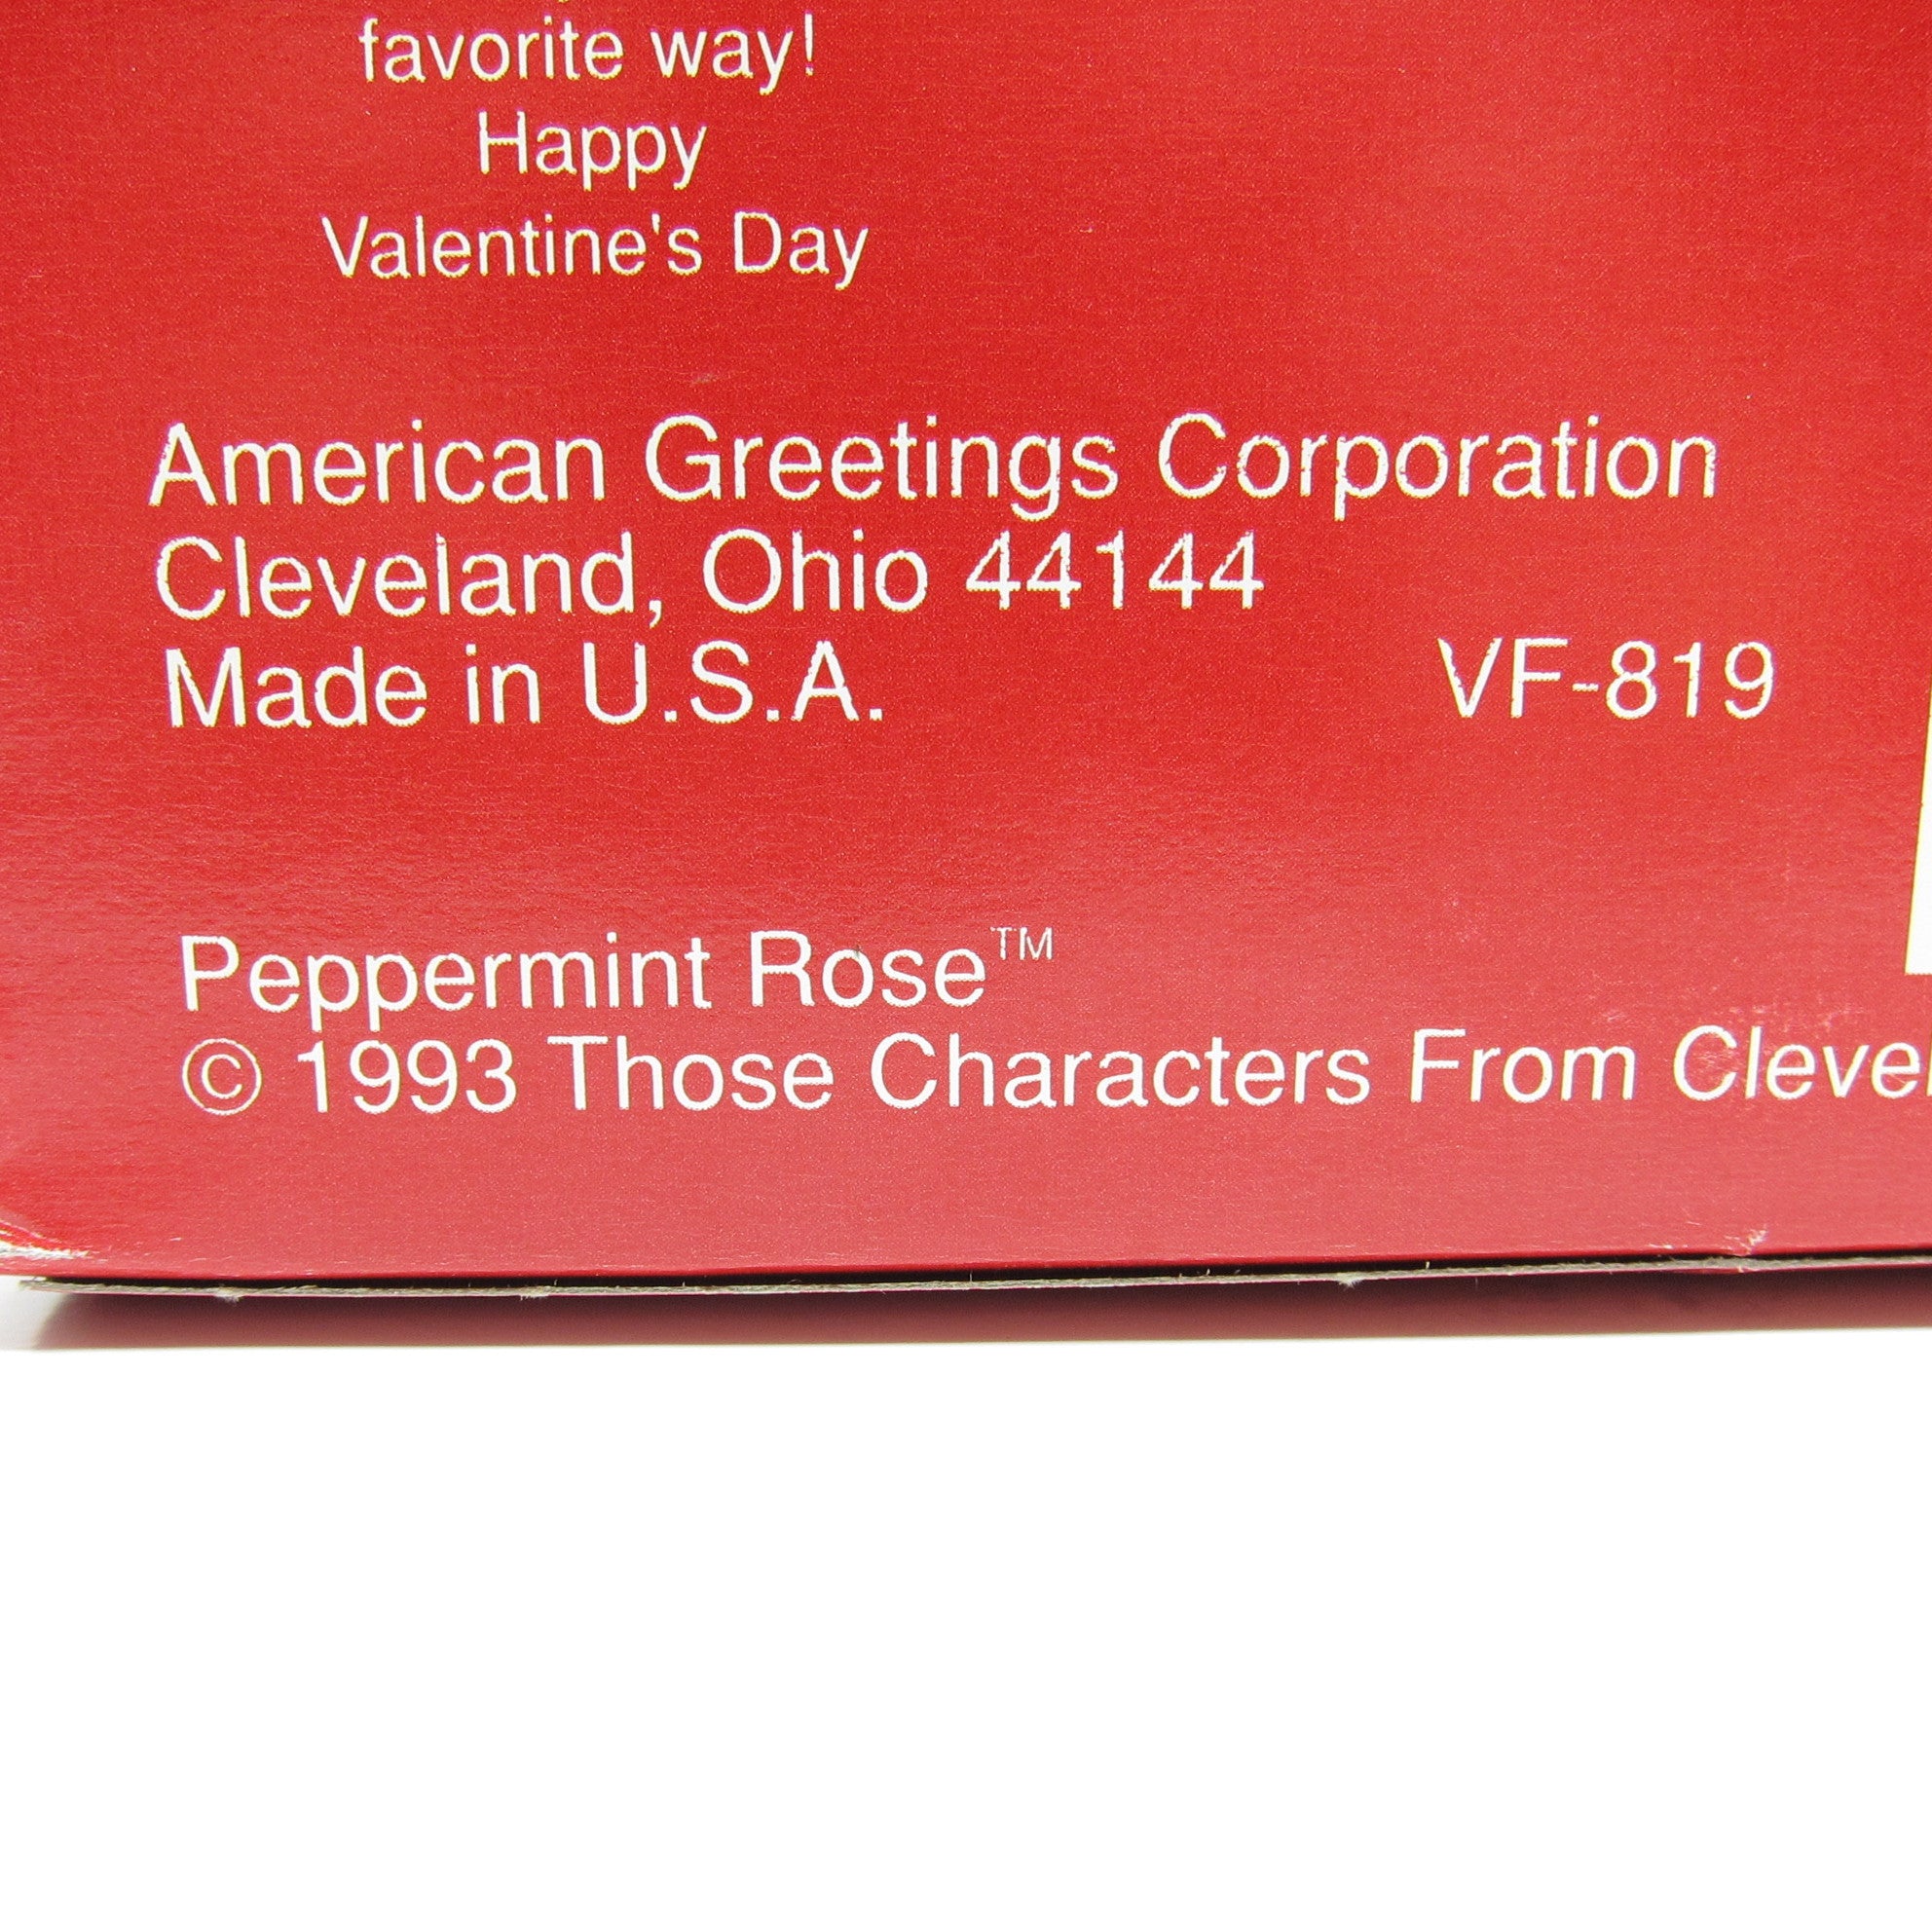 Peppermint Rose Valentines 1993 Vintage Box of 38 Valentine's Day